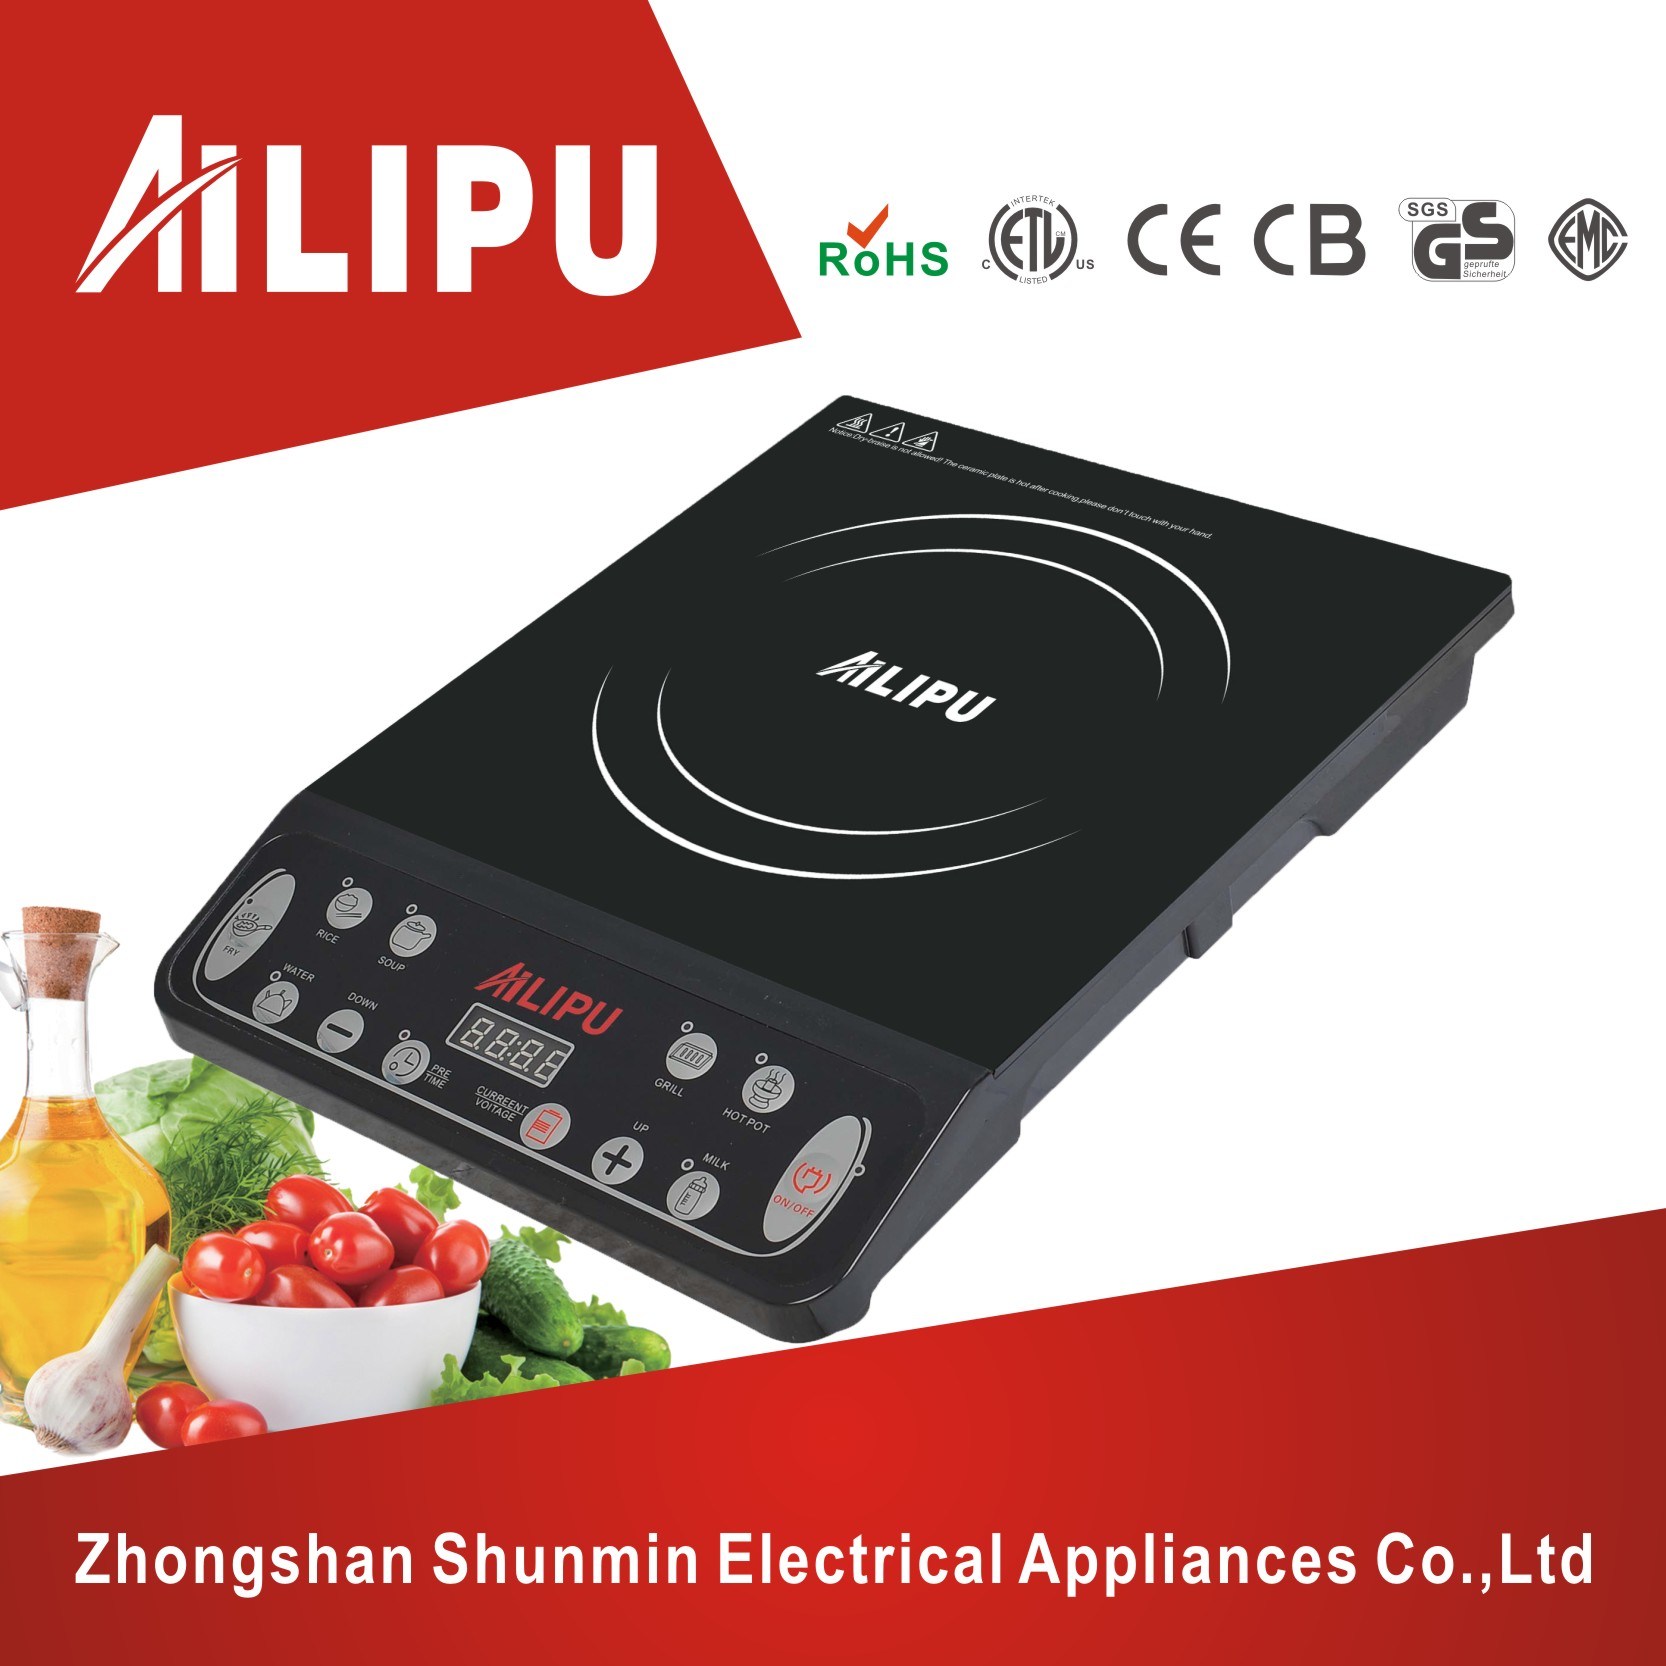 ABS Housing and Countertop Easily Use Friendly Induction Cooker, Induction Cooktop